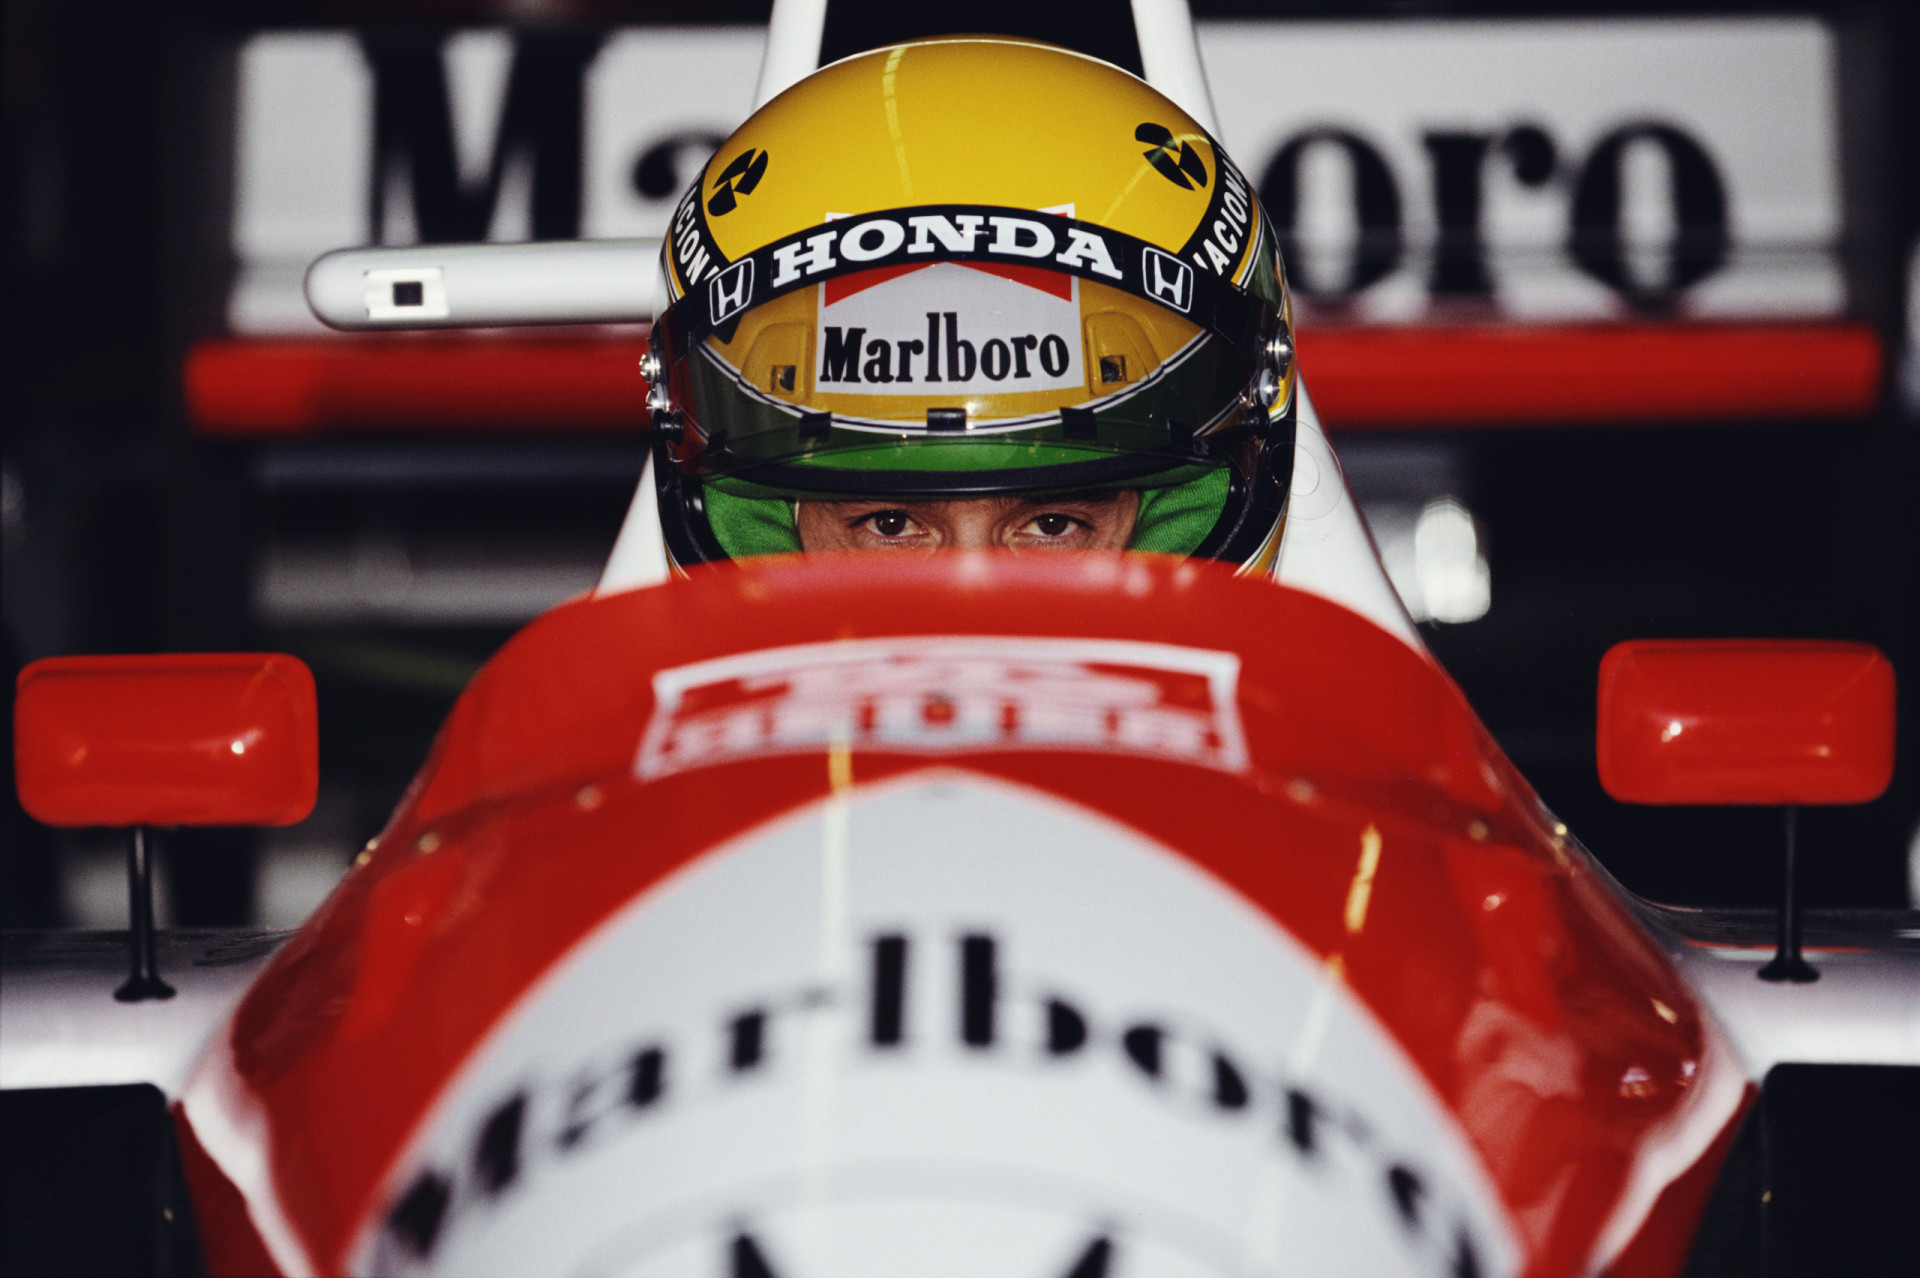 <p>Senna won the 1991 season-opening United States Grand Prix with the new Honda V12-powered McLaren MP4/6.</p><p><a href="https://www.msn.com/en-us/community/channel/vid-7xx8mnucu55yw63we9va2gwr7uihbxwc68fxqp25x6tg4ftibpra?cvid=94631541bc0f4f89bfd59158d696ad7e">Follow us and access great exclusive content every day</a></p>